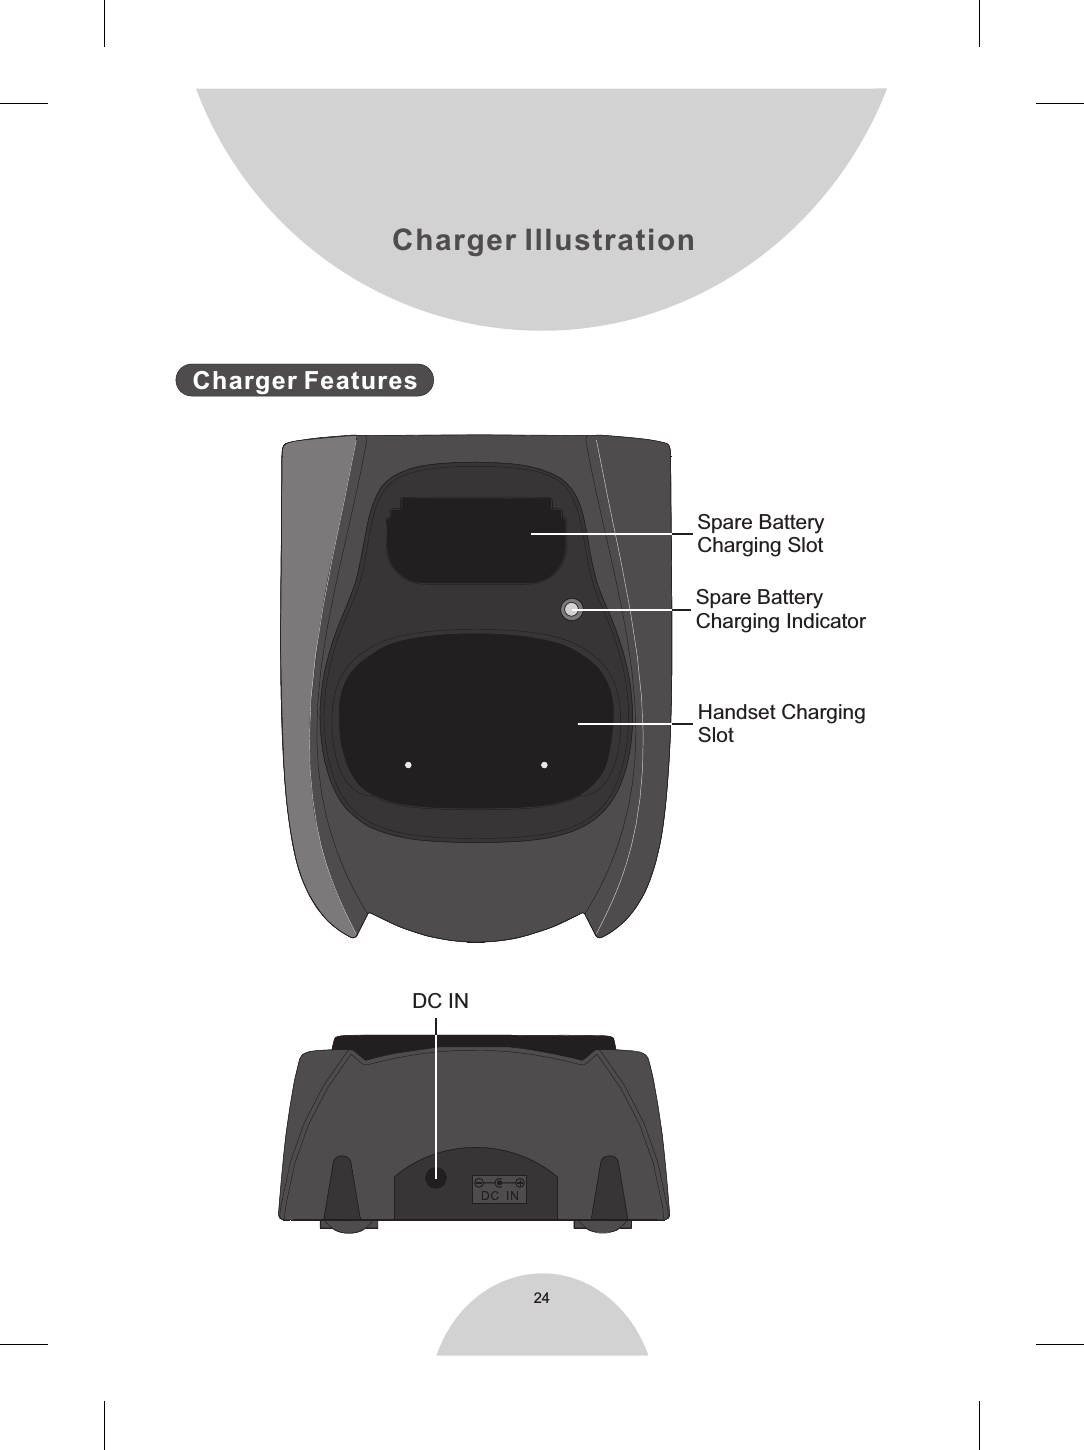 24Charger IllustrationDC INSpare BatteryCharging SlotSpare BatteryCharging IndicatorHandset ChargingSlotCharger Features